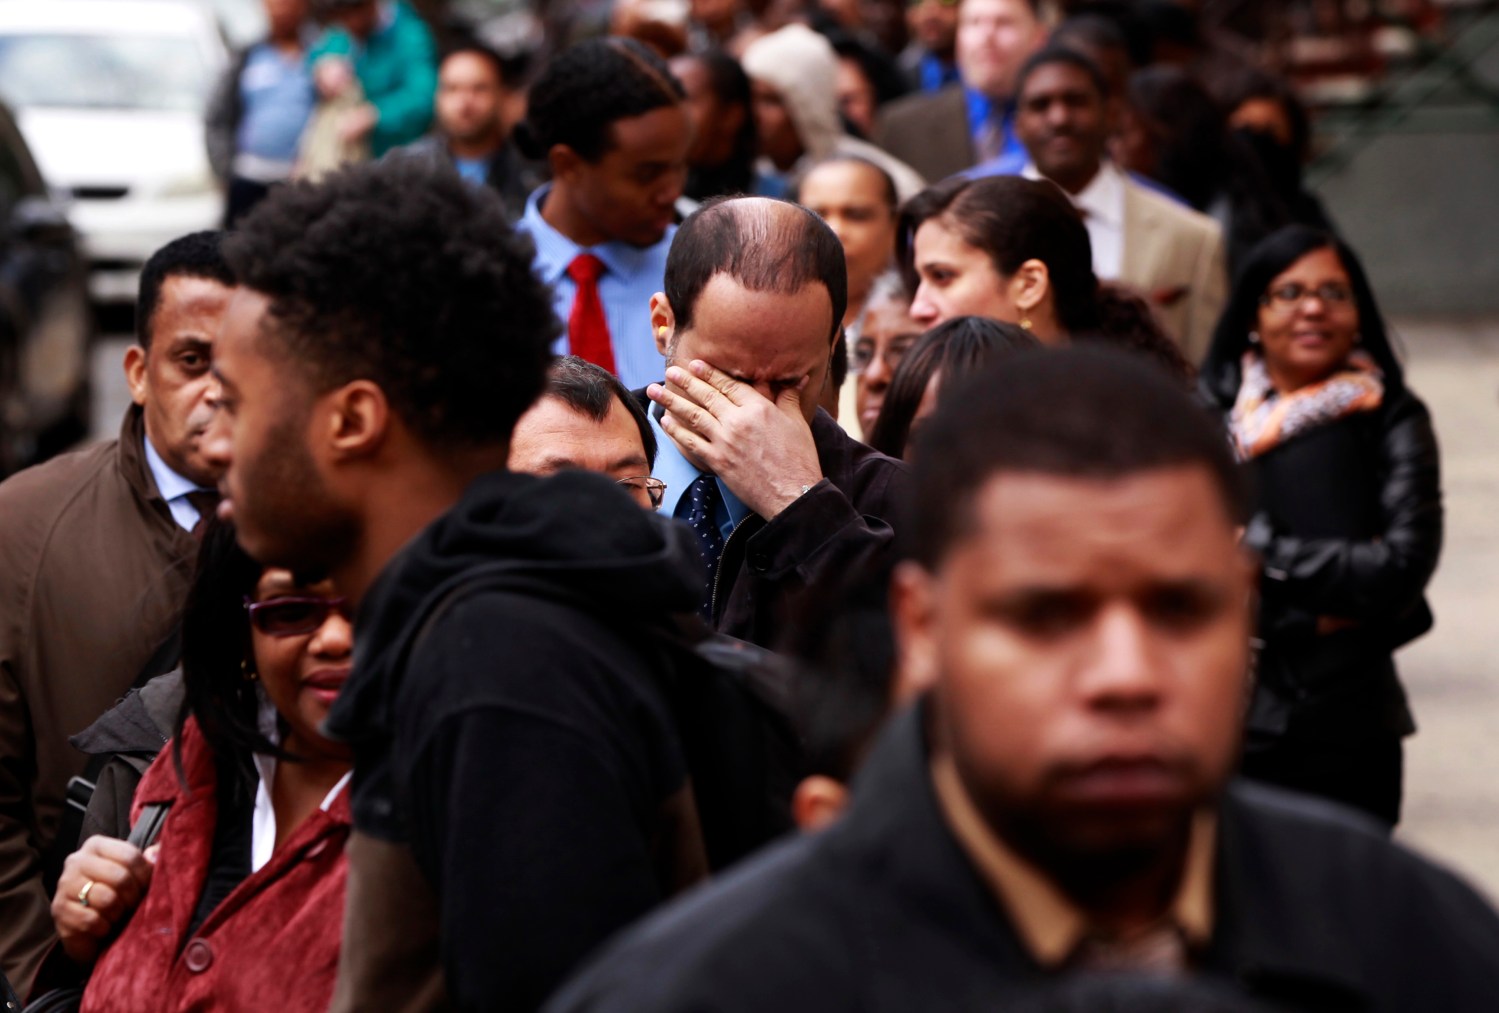 Man rubs his eyes as he waits in a line of jobseekers, to attend the Dr. Martin Luther King Jr. career fair held by the New York State department of Labor in New York